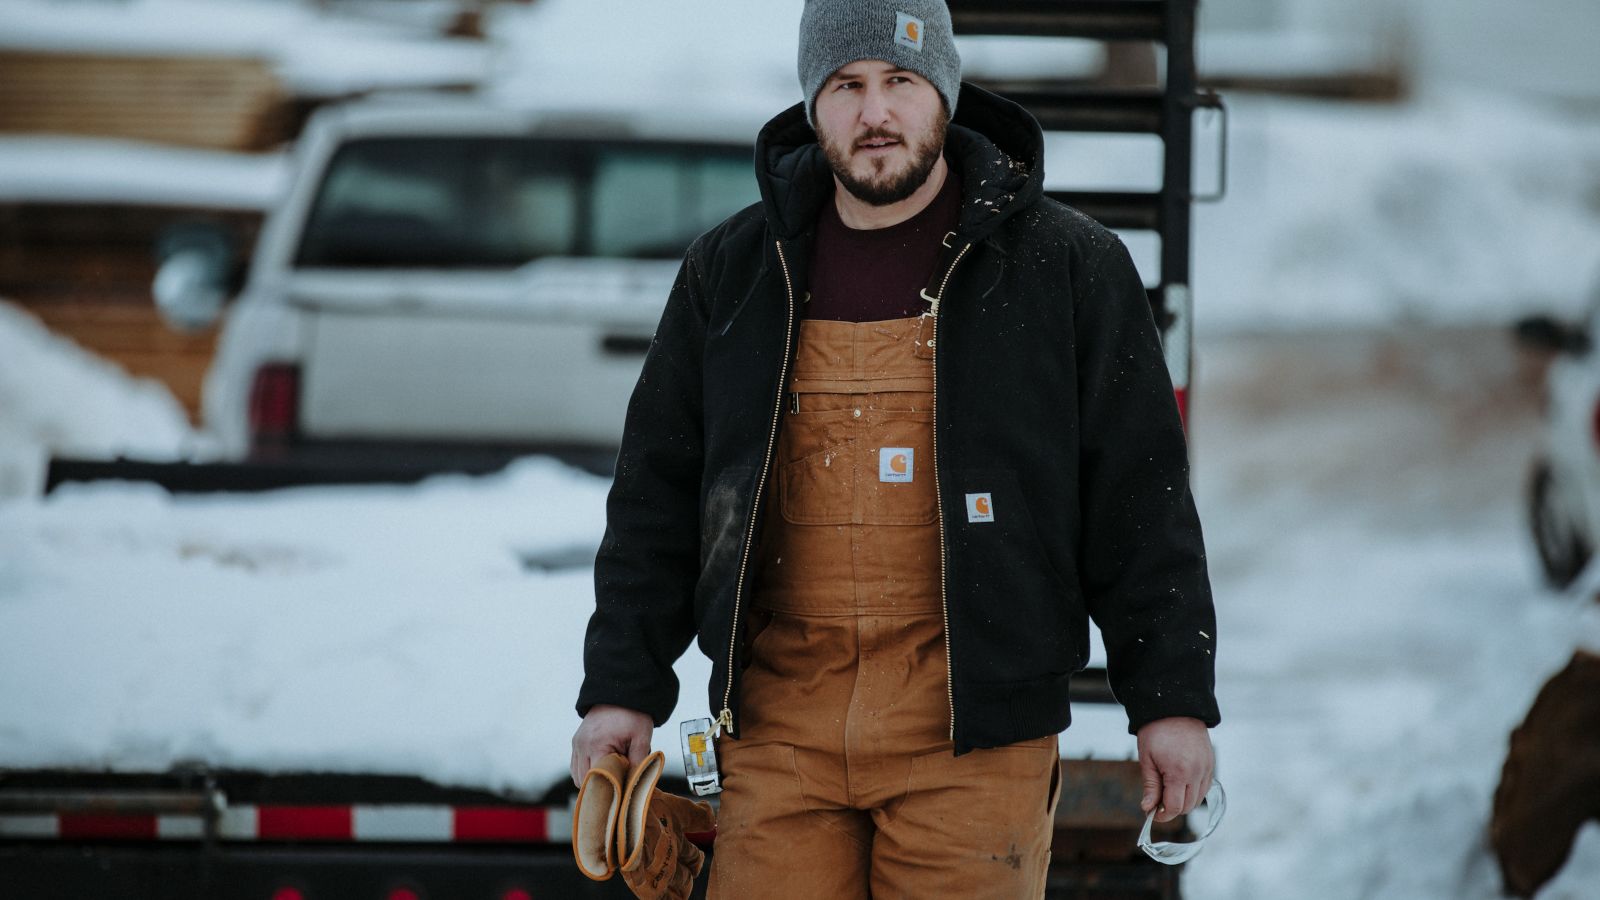 Carhartt has the outerwear you need to stay warm this winter